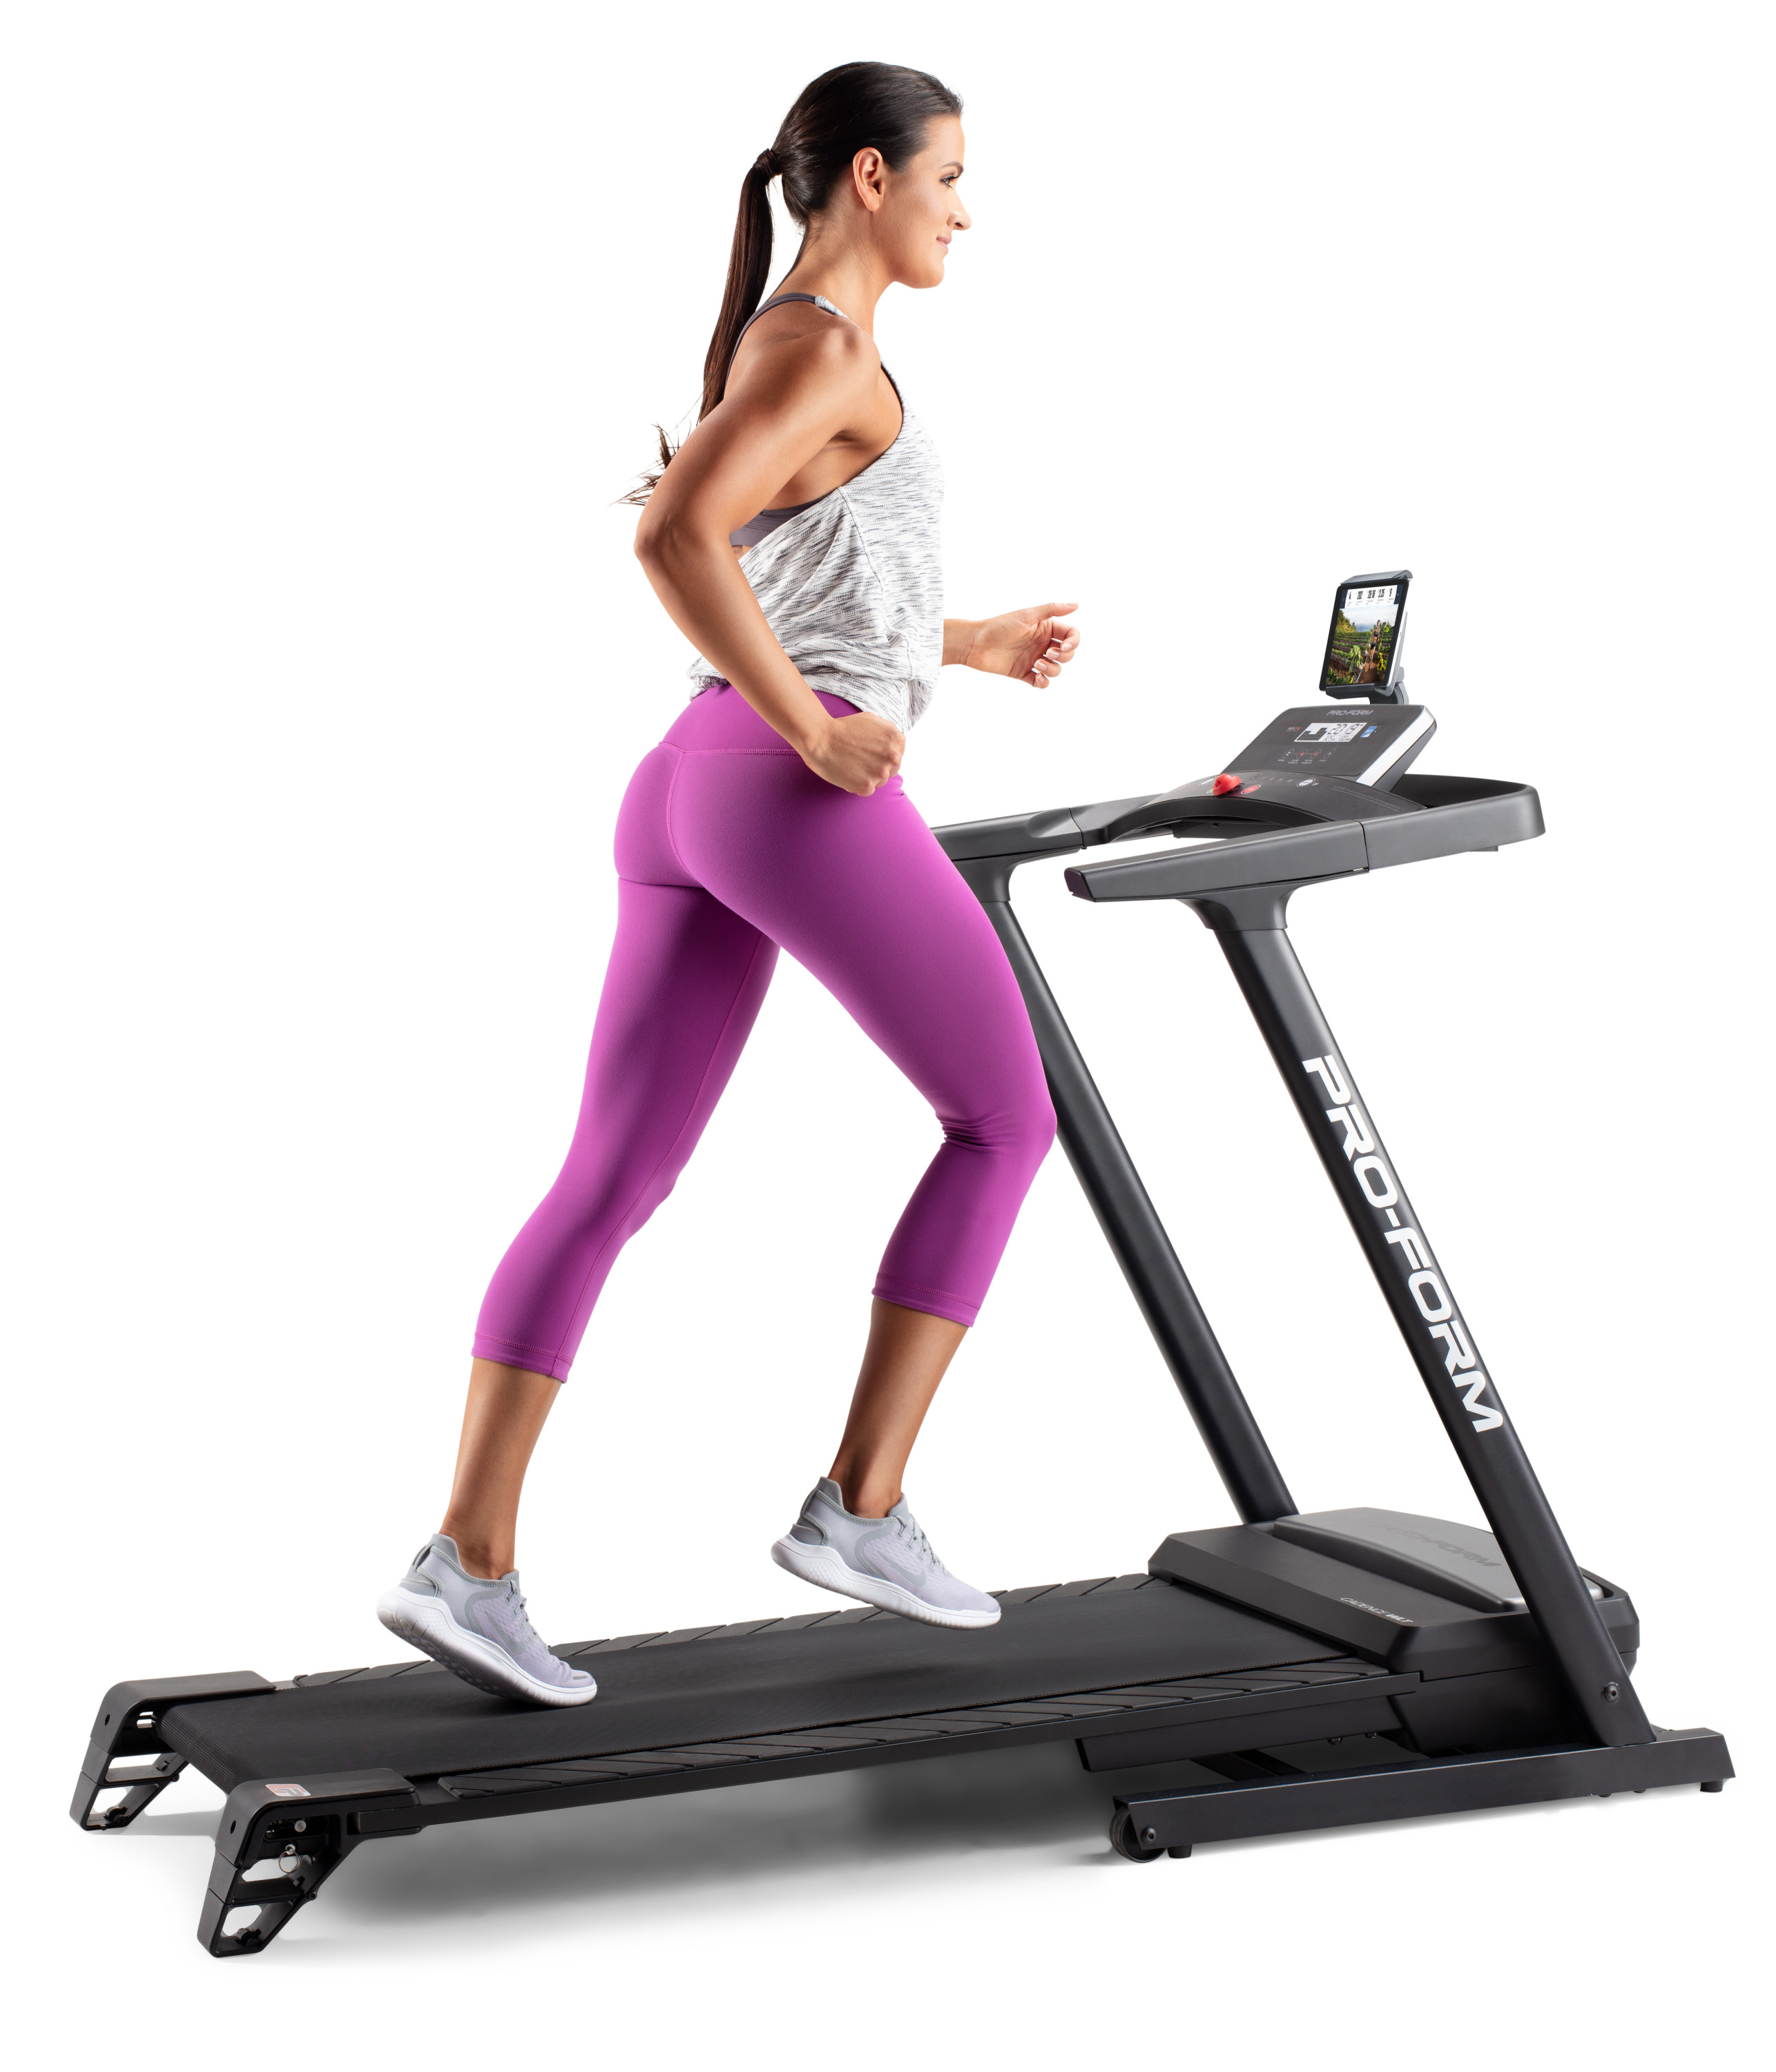 ProForm Cadence WLT Folding Treadmill with Reflex Deck for Walking and Jogging, iFit Bluetooth Enabled - image 19 of 31